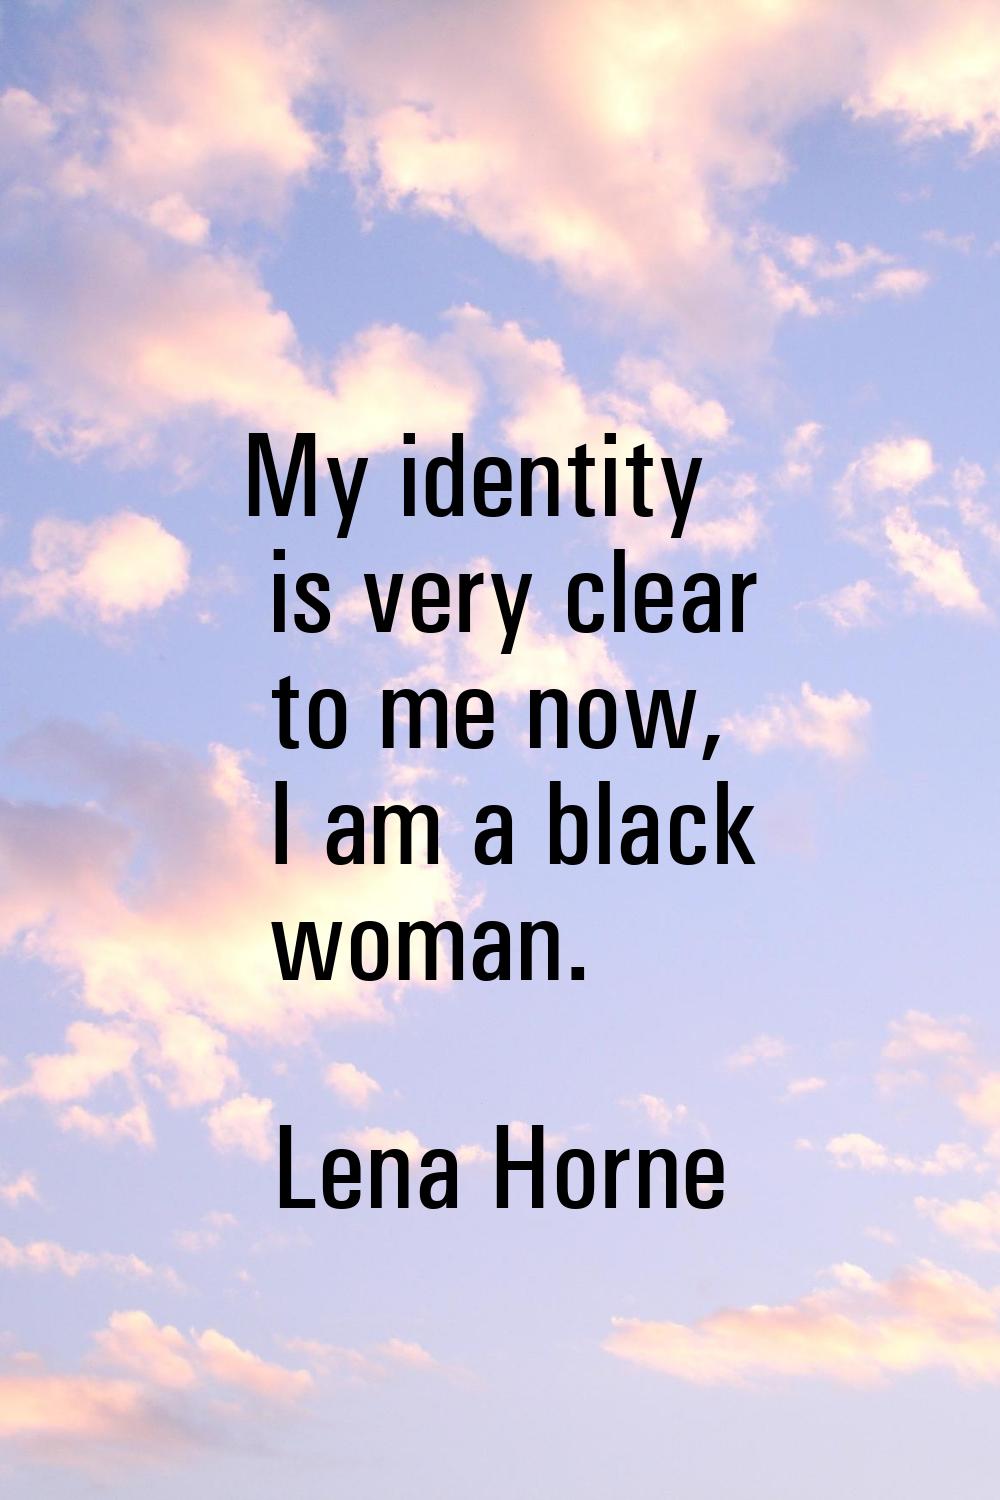 My identity is very clear to me now, I am a black woman.